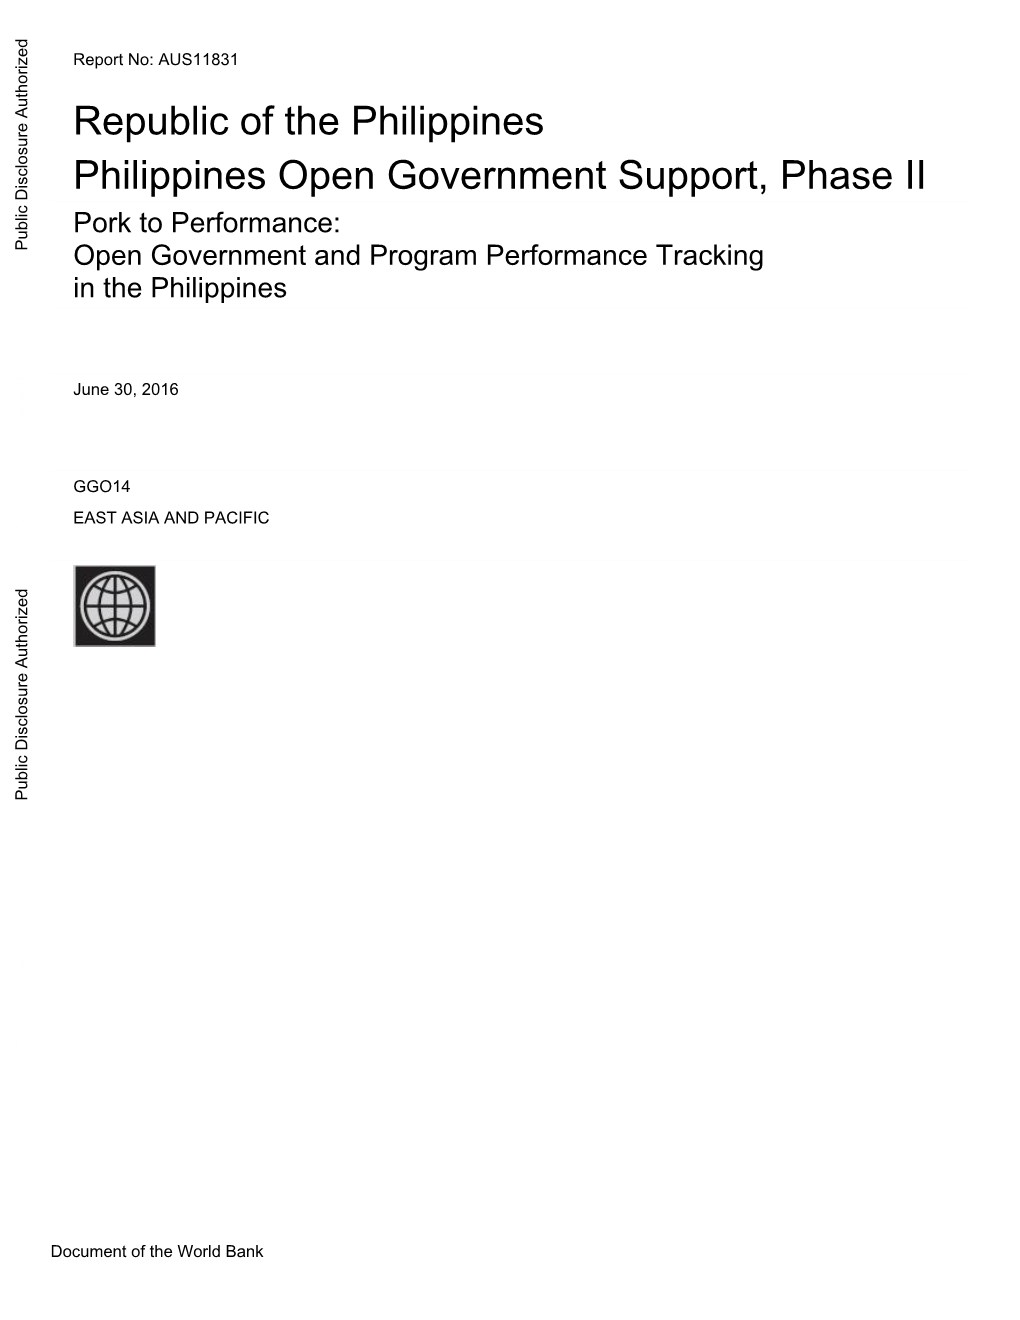 Pork to Performance: Public Disclosure Authorized Open Government and Program Performance Tracking in the Philippines